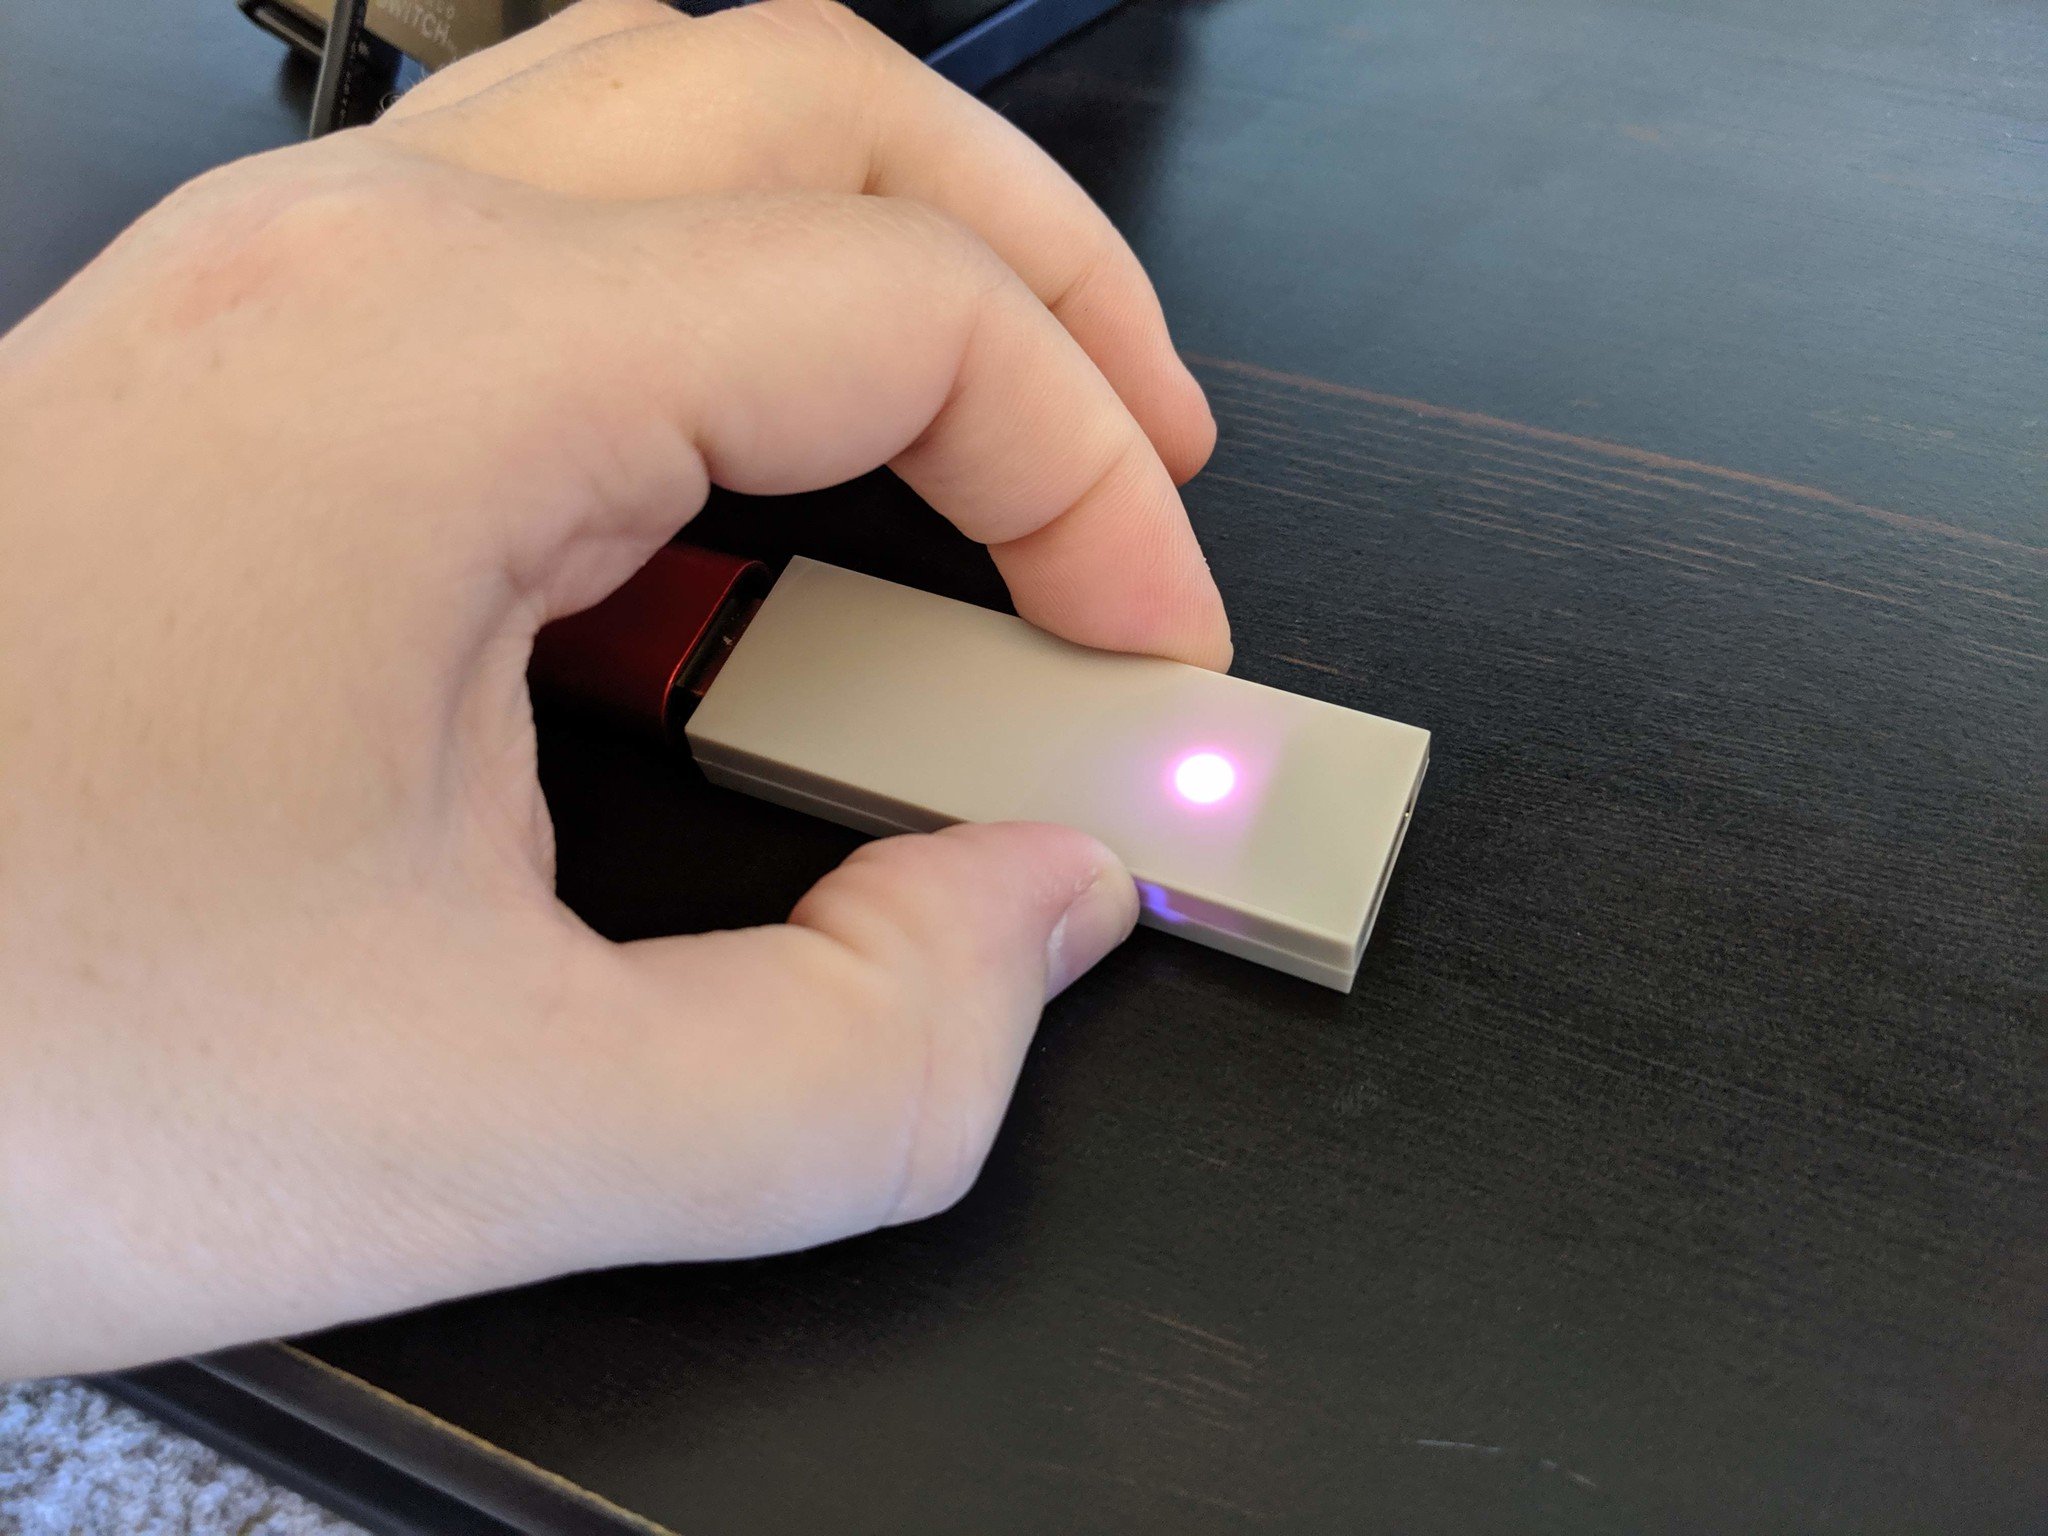 How to connect your Xbox One controller with the Nintendo Switch in wireless tabletop mode step three: hold the small black button on the side of the Magic-NS Adapter down for three to five seconds to turn the red or purple light on